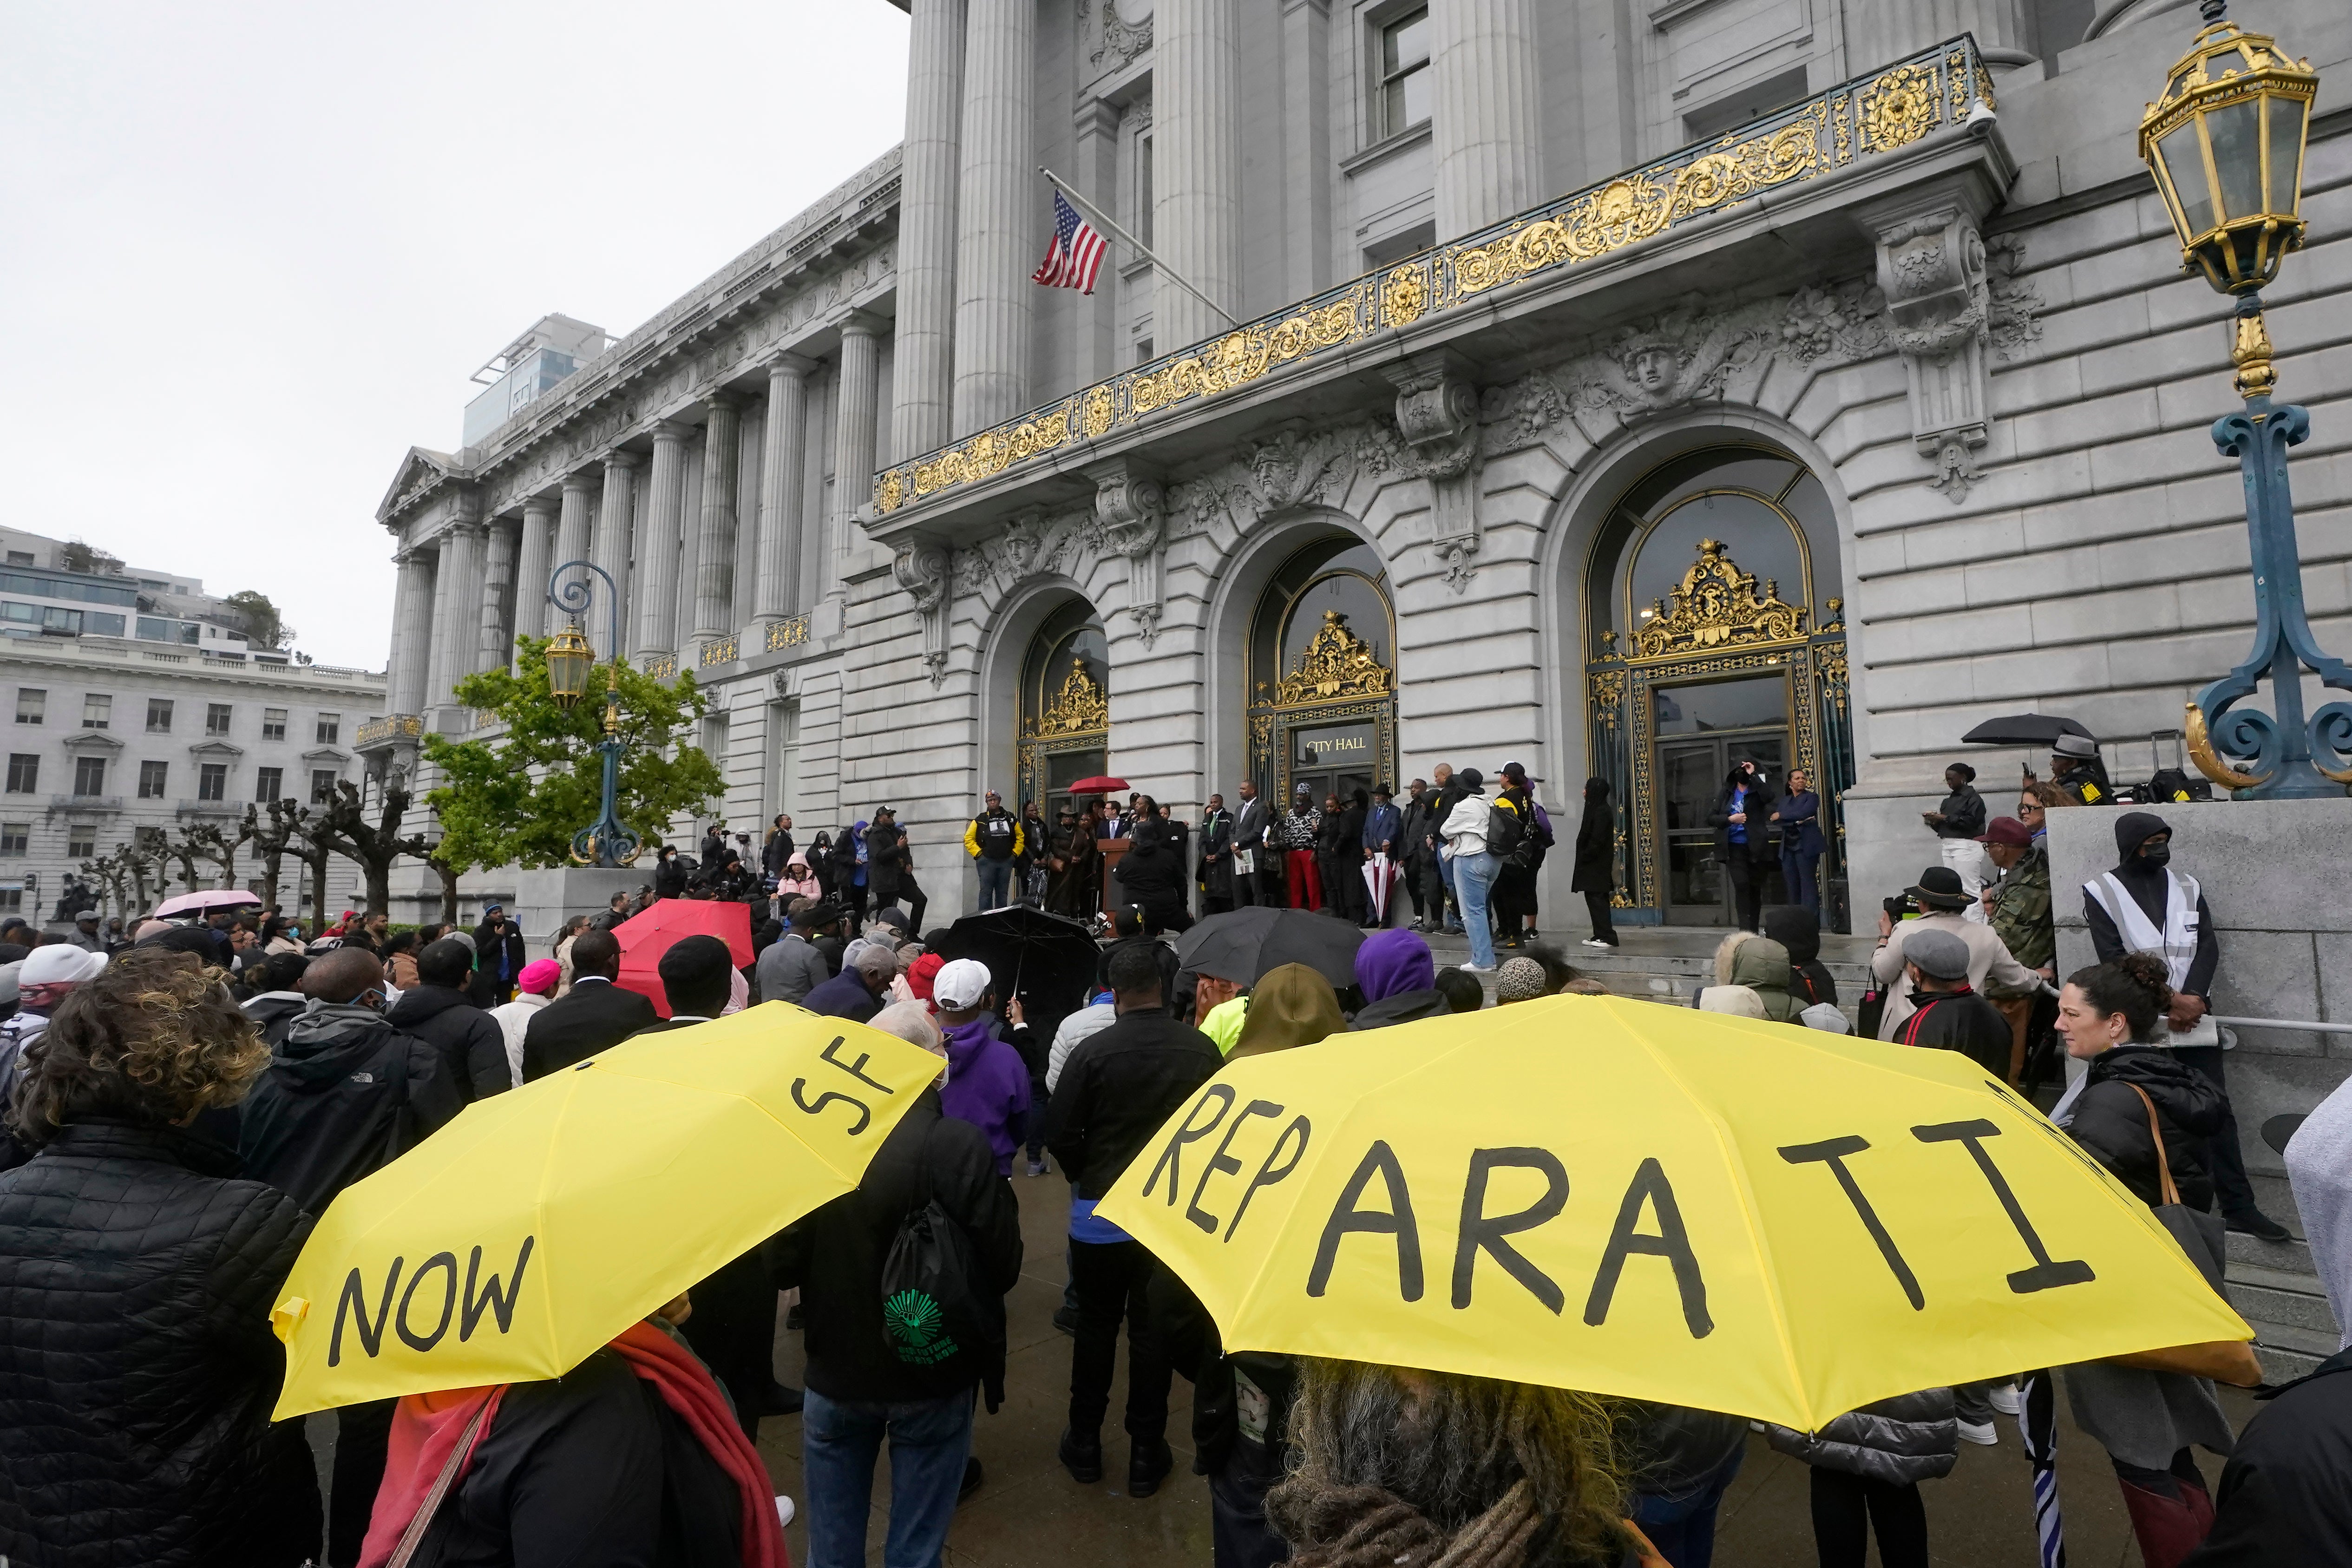 A crowd listens to speakers at a reparations rally outside of City Hall in San Francisco on 14 March 2023